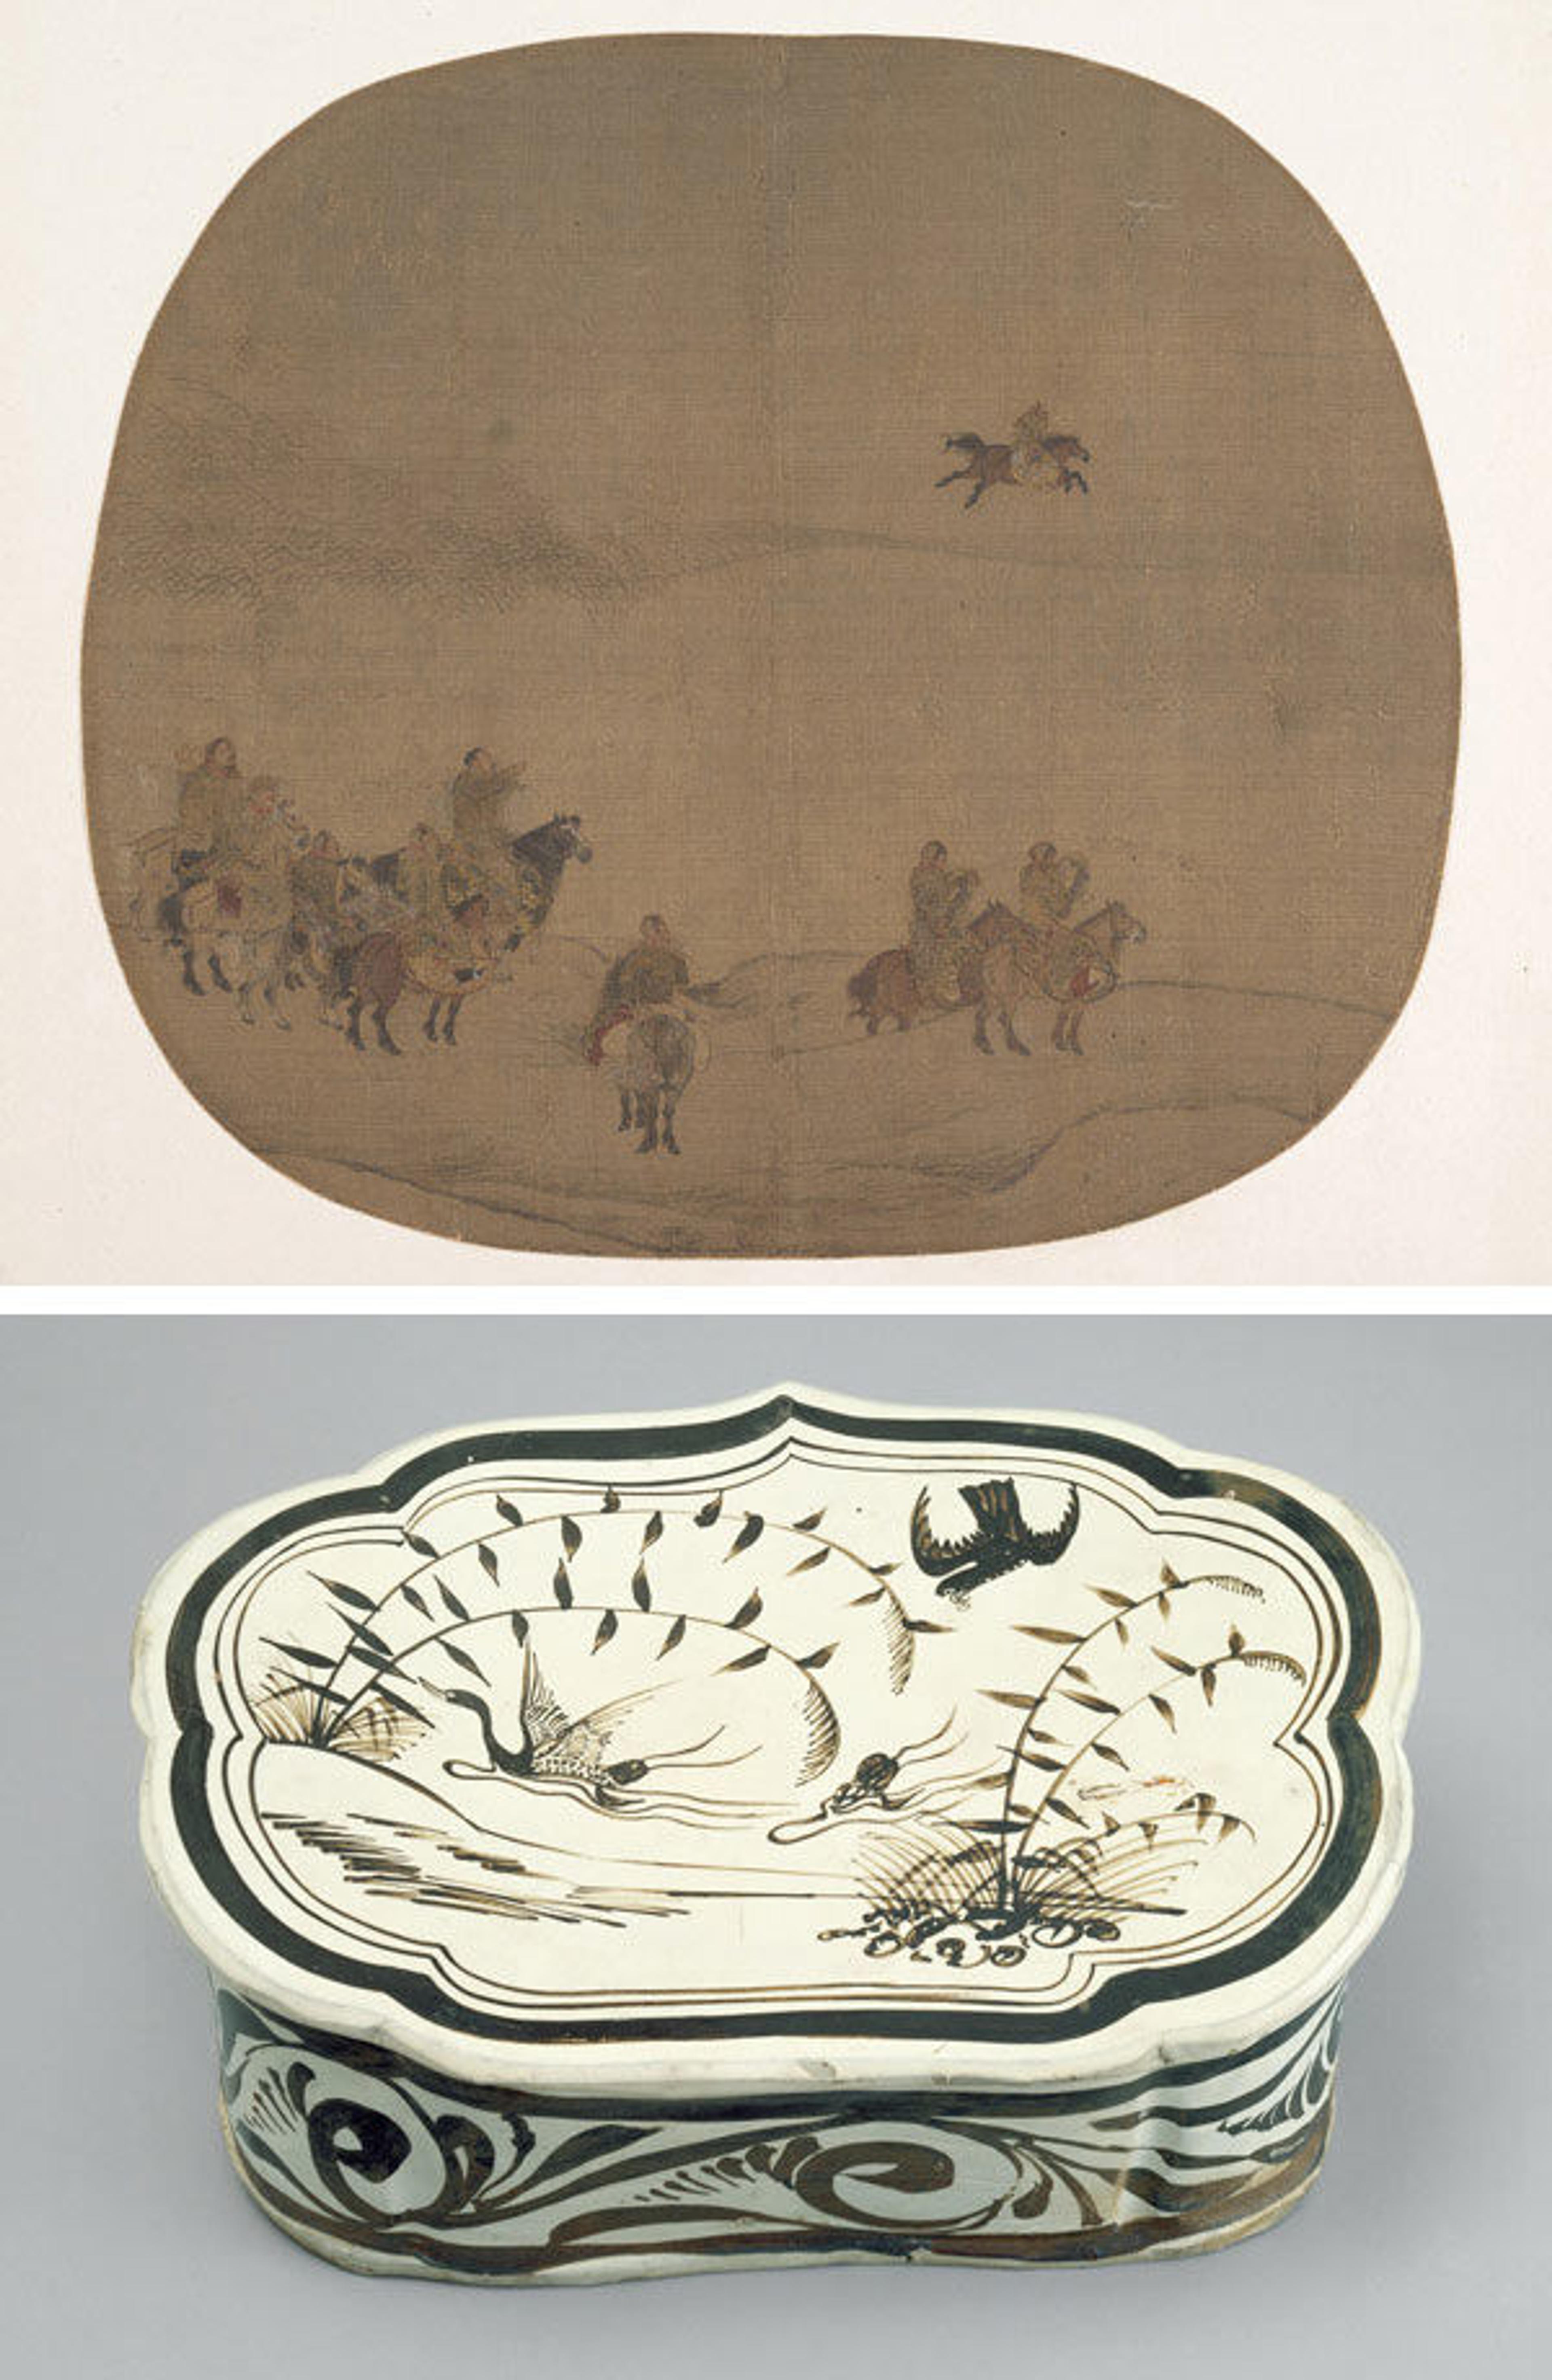 Nomads hunting with falcons; Pillow with hawk hunting a swan